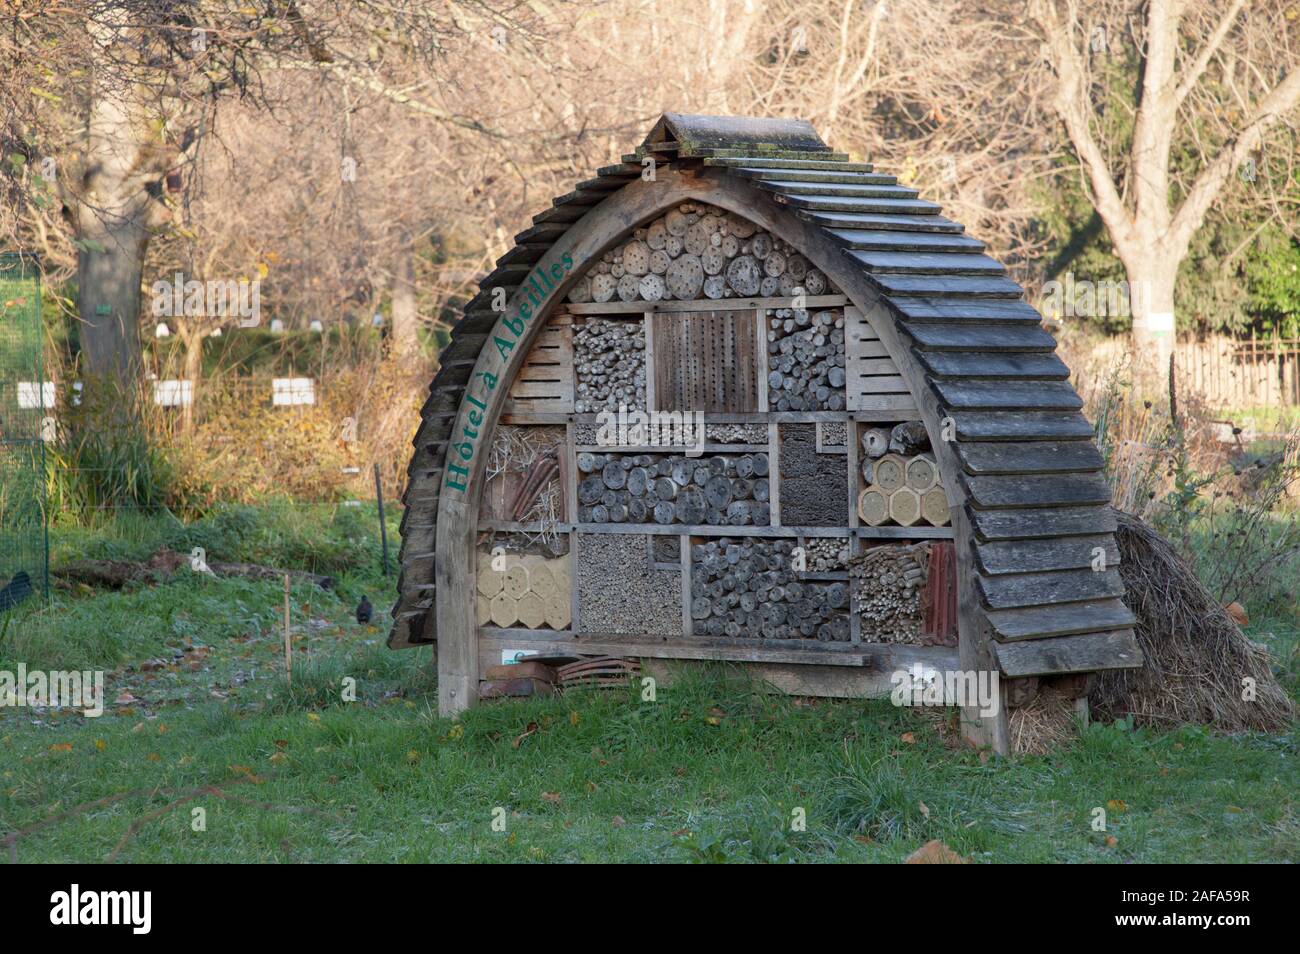 A man made habitat for insects and wildlife, often called a bug hotel, in Le Jardin des Plantes, Paris Stock Photo